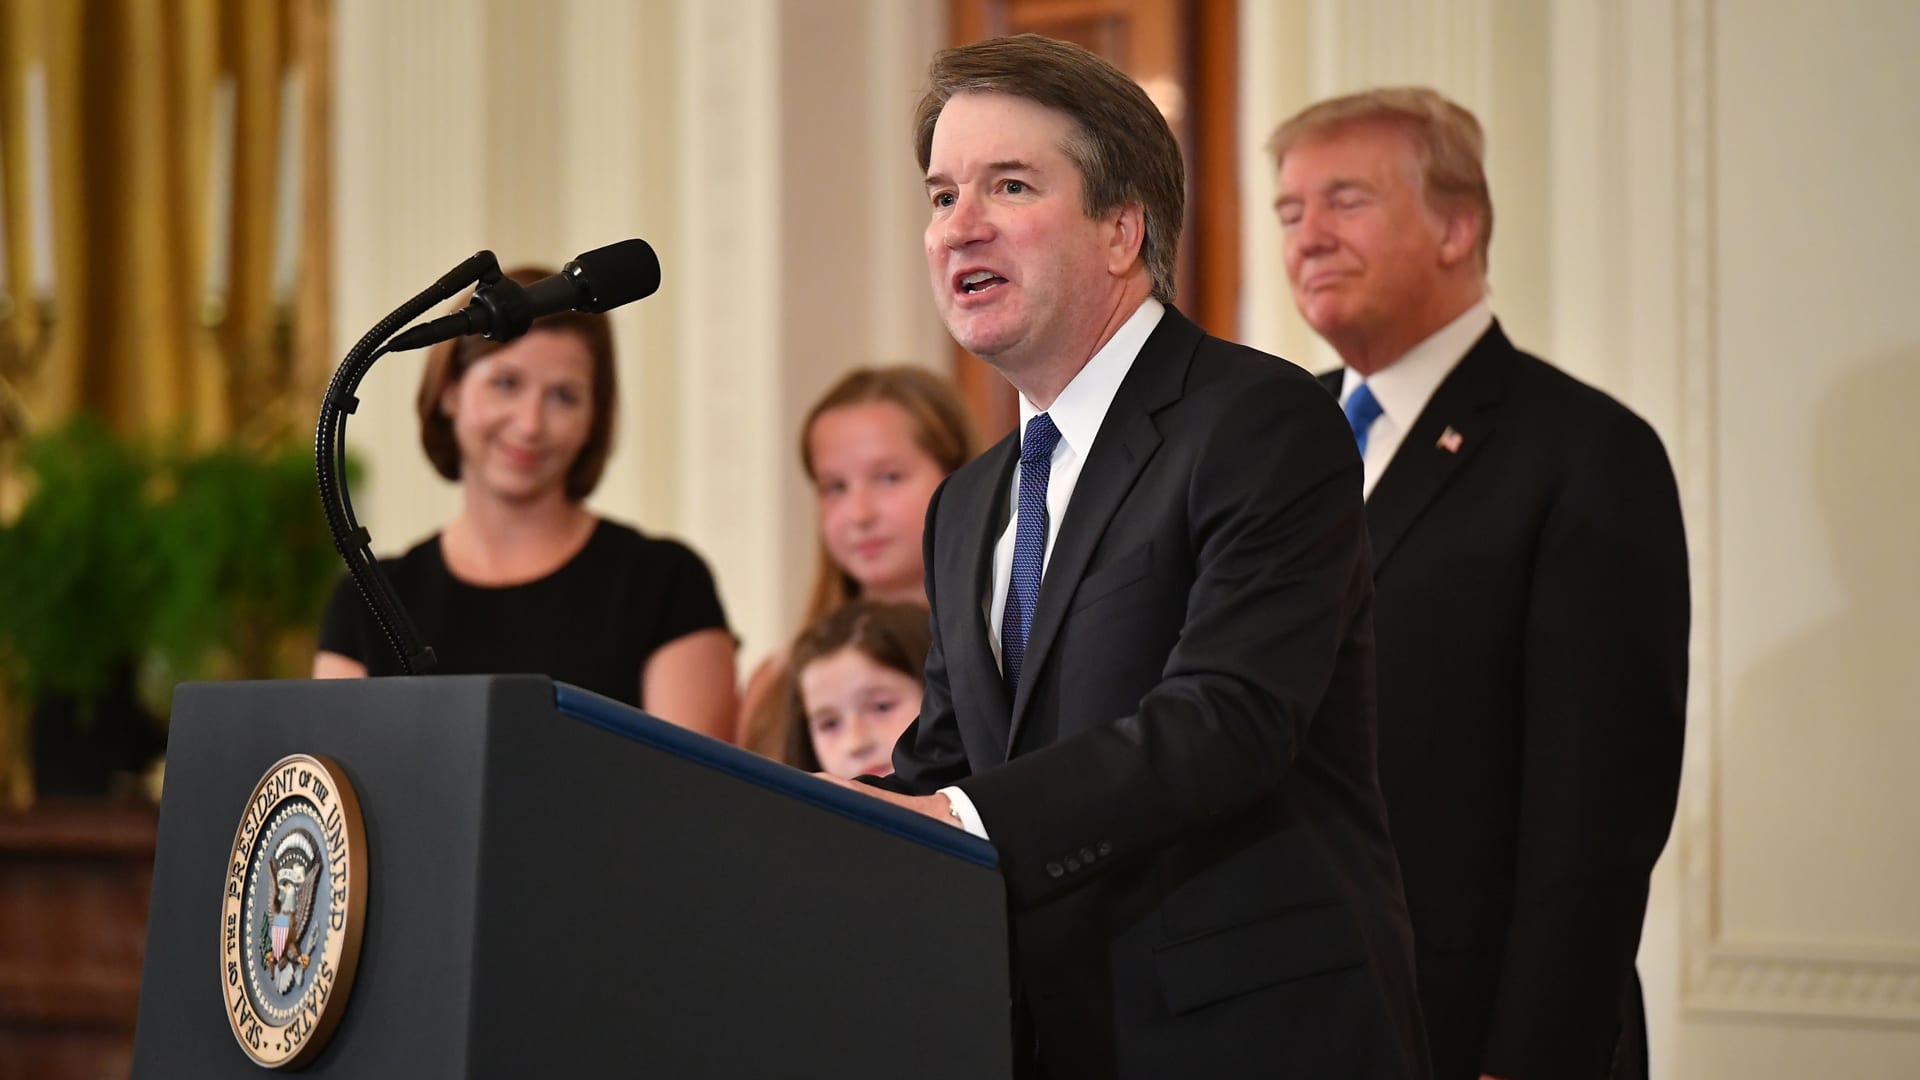 4 things to know about Brett Kavanaugh, Trump’s Supreme Court nominee